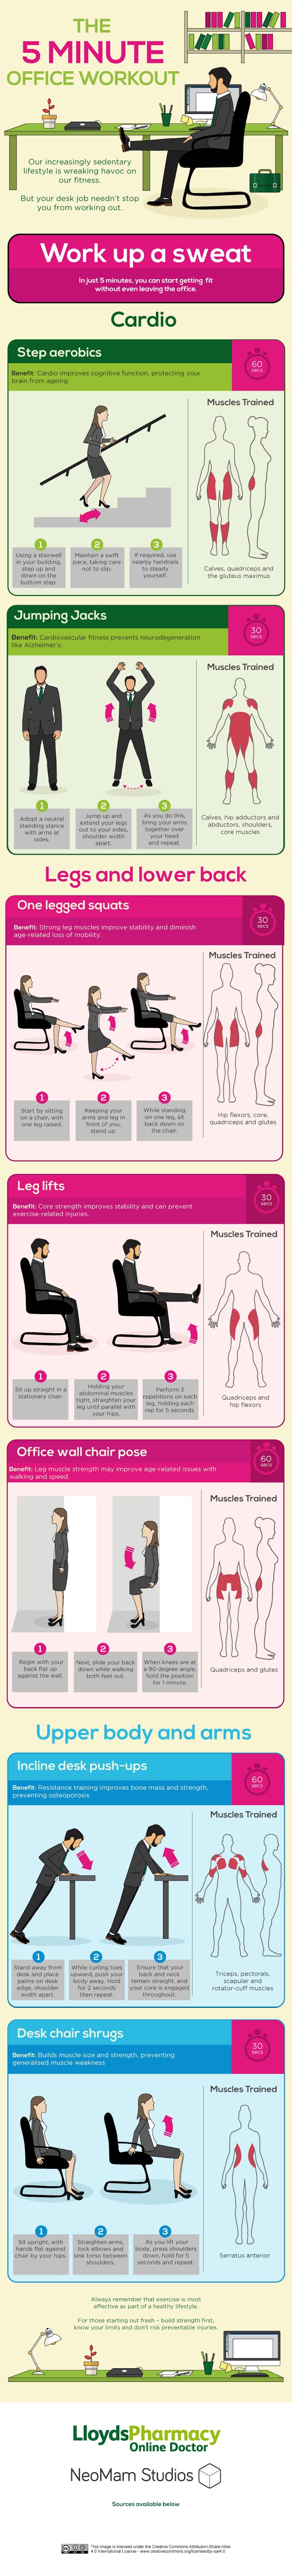 The 5 Minute Office Workout #infographic 